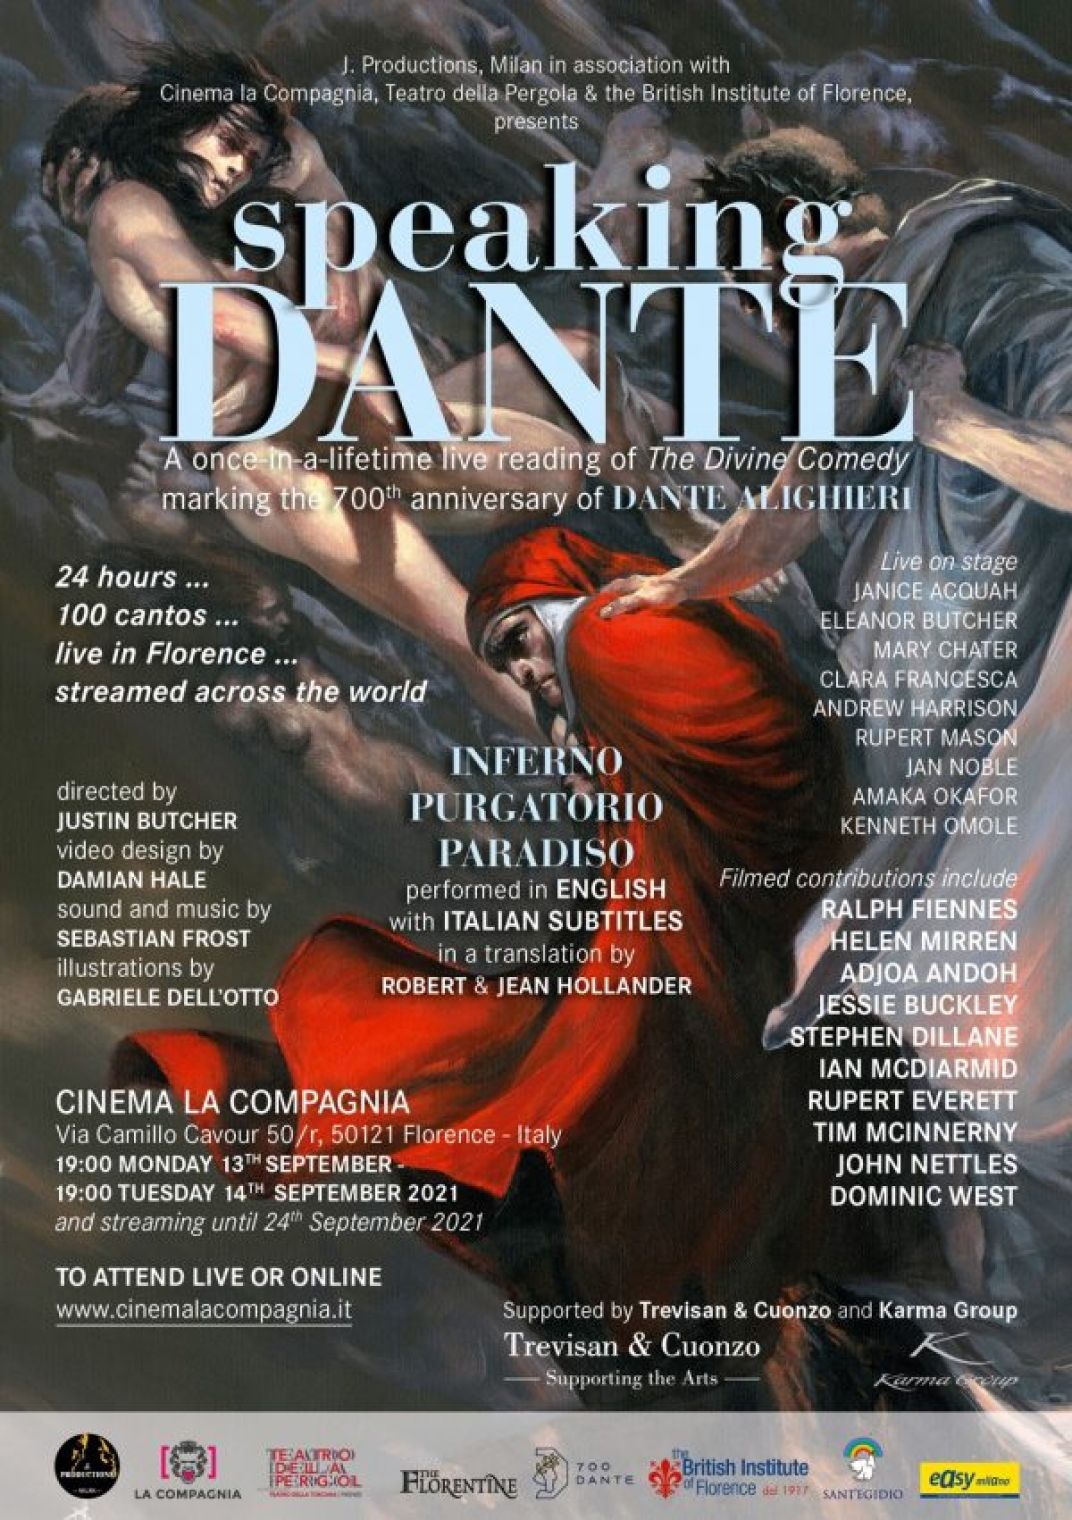 A once in a lifetime live 24 hour reading of The Divine Comedy. 'Speaking Dante' will mark the 700th Anniversary of Dante Alighieri.